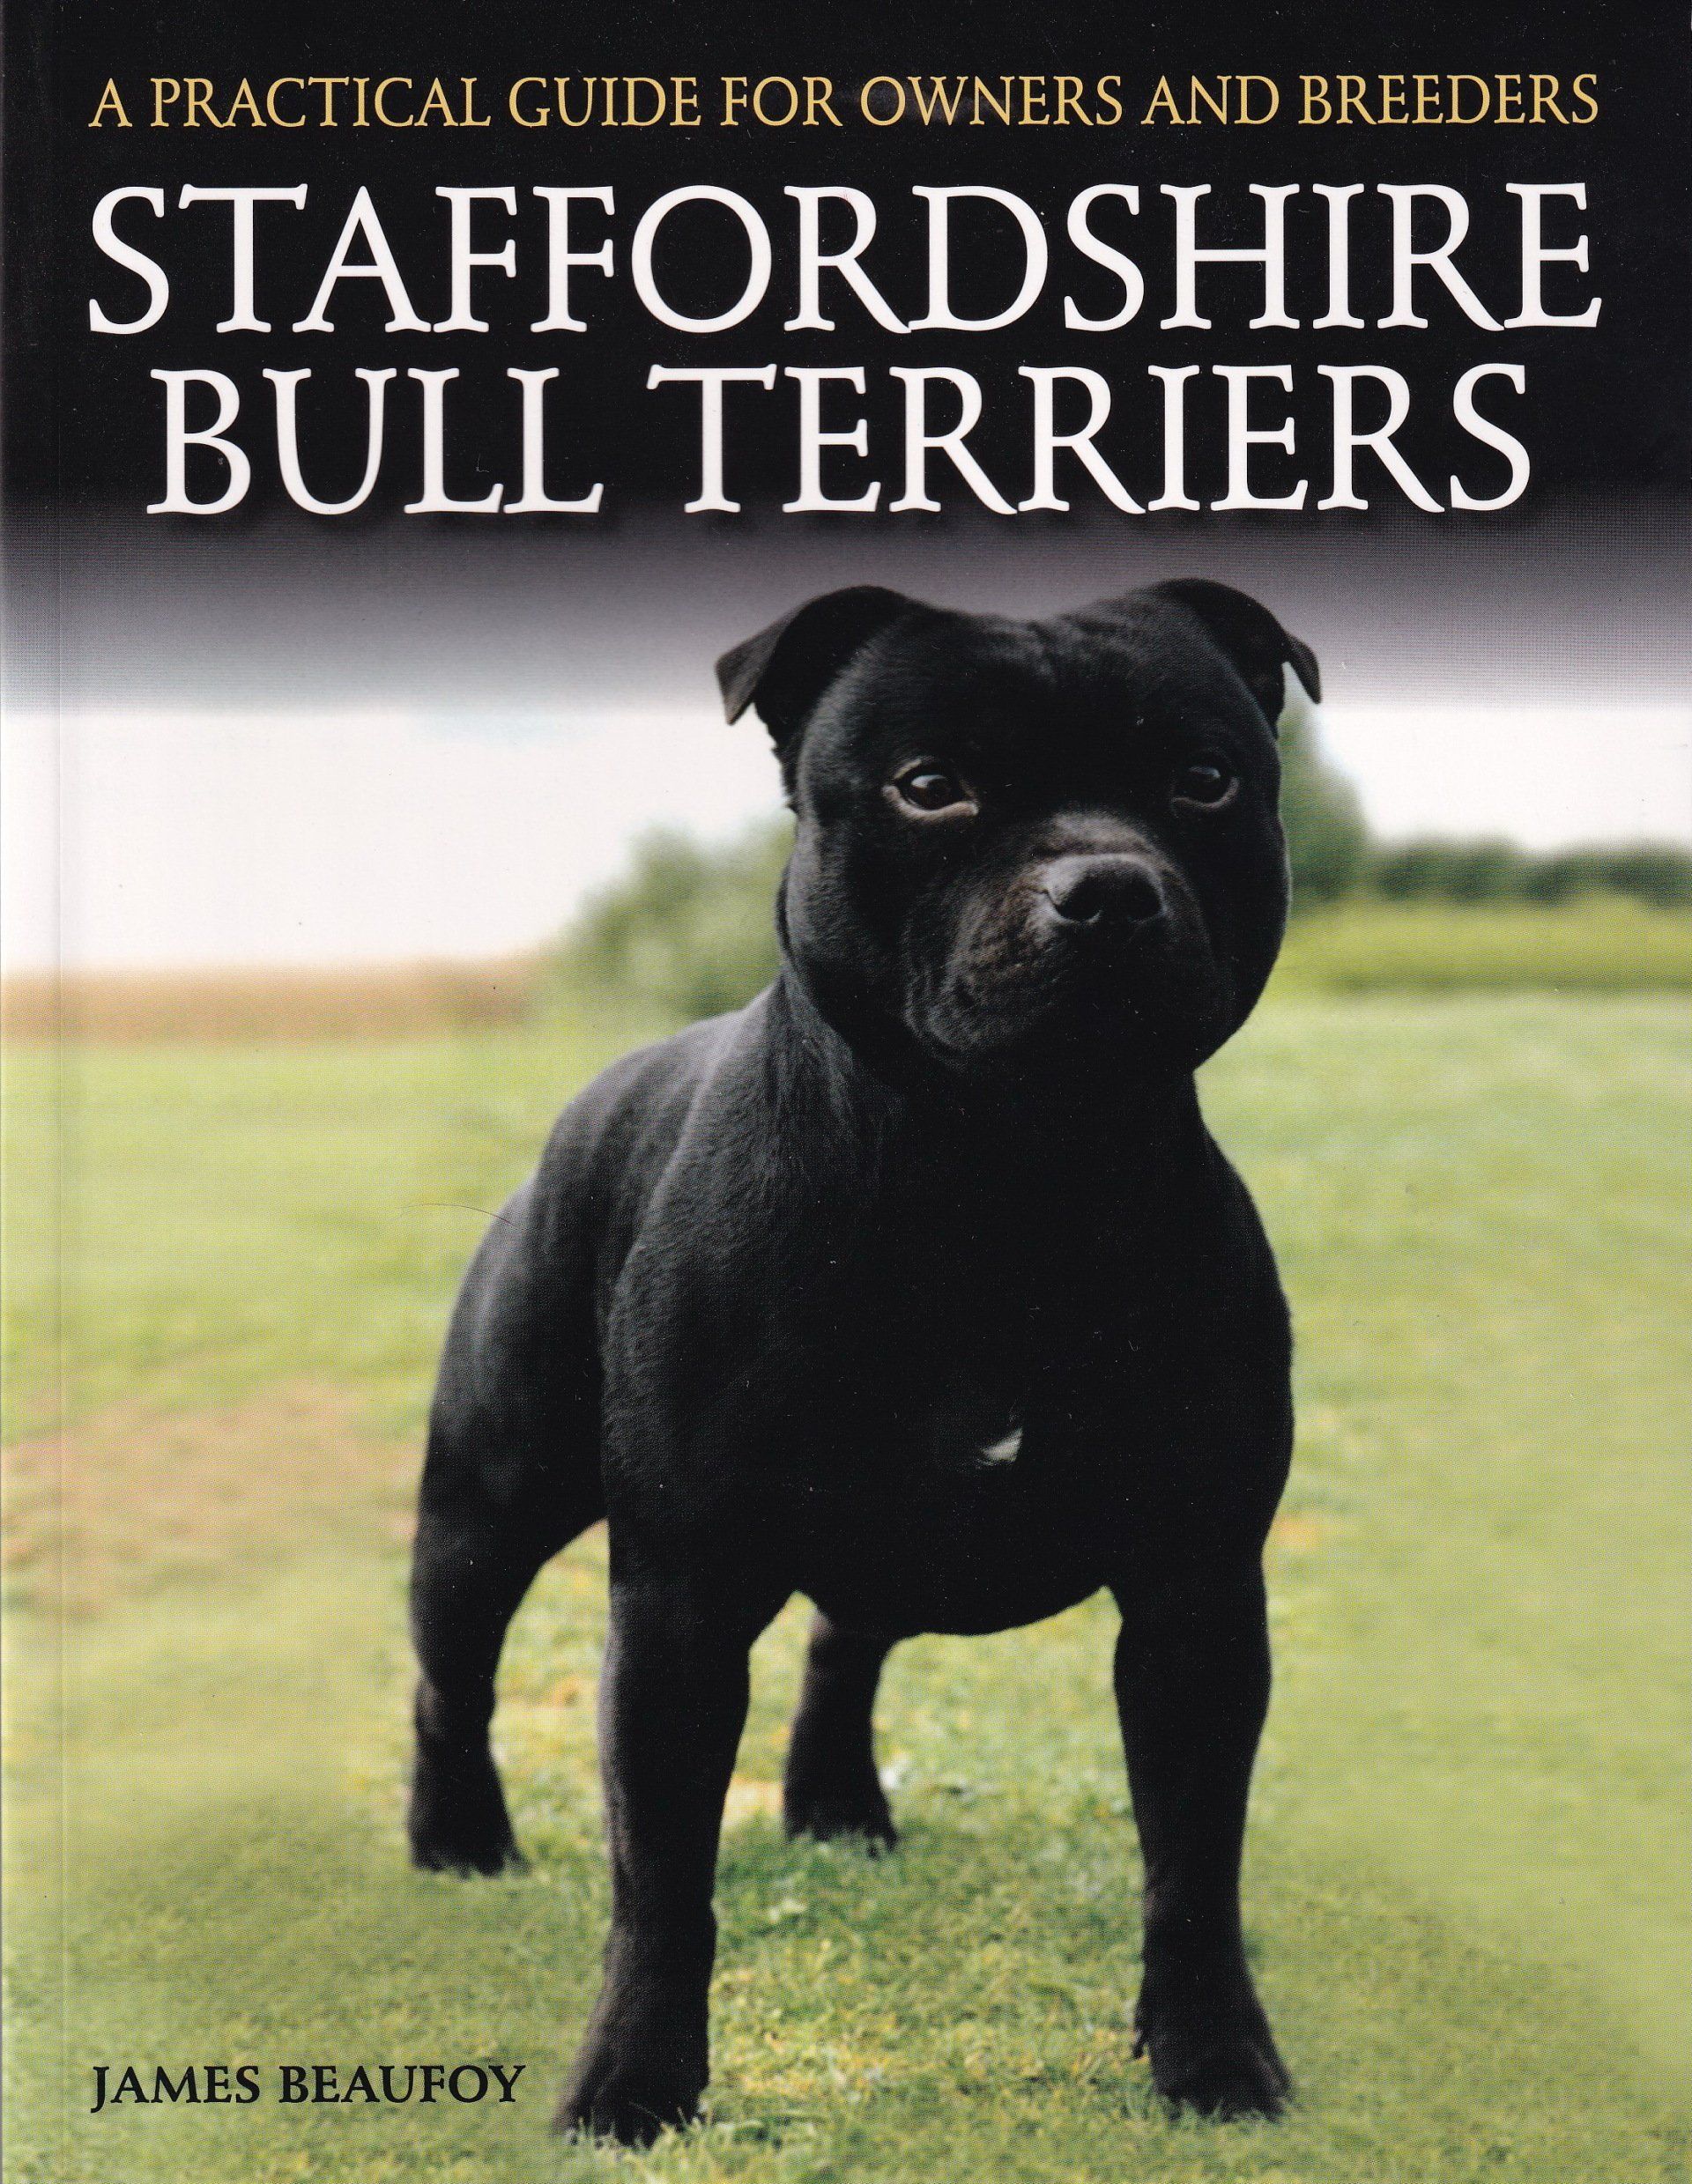 Staffordshire Bull Terriers: A Practical Guide for Owners and Breeders by James Beaufoy